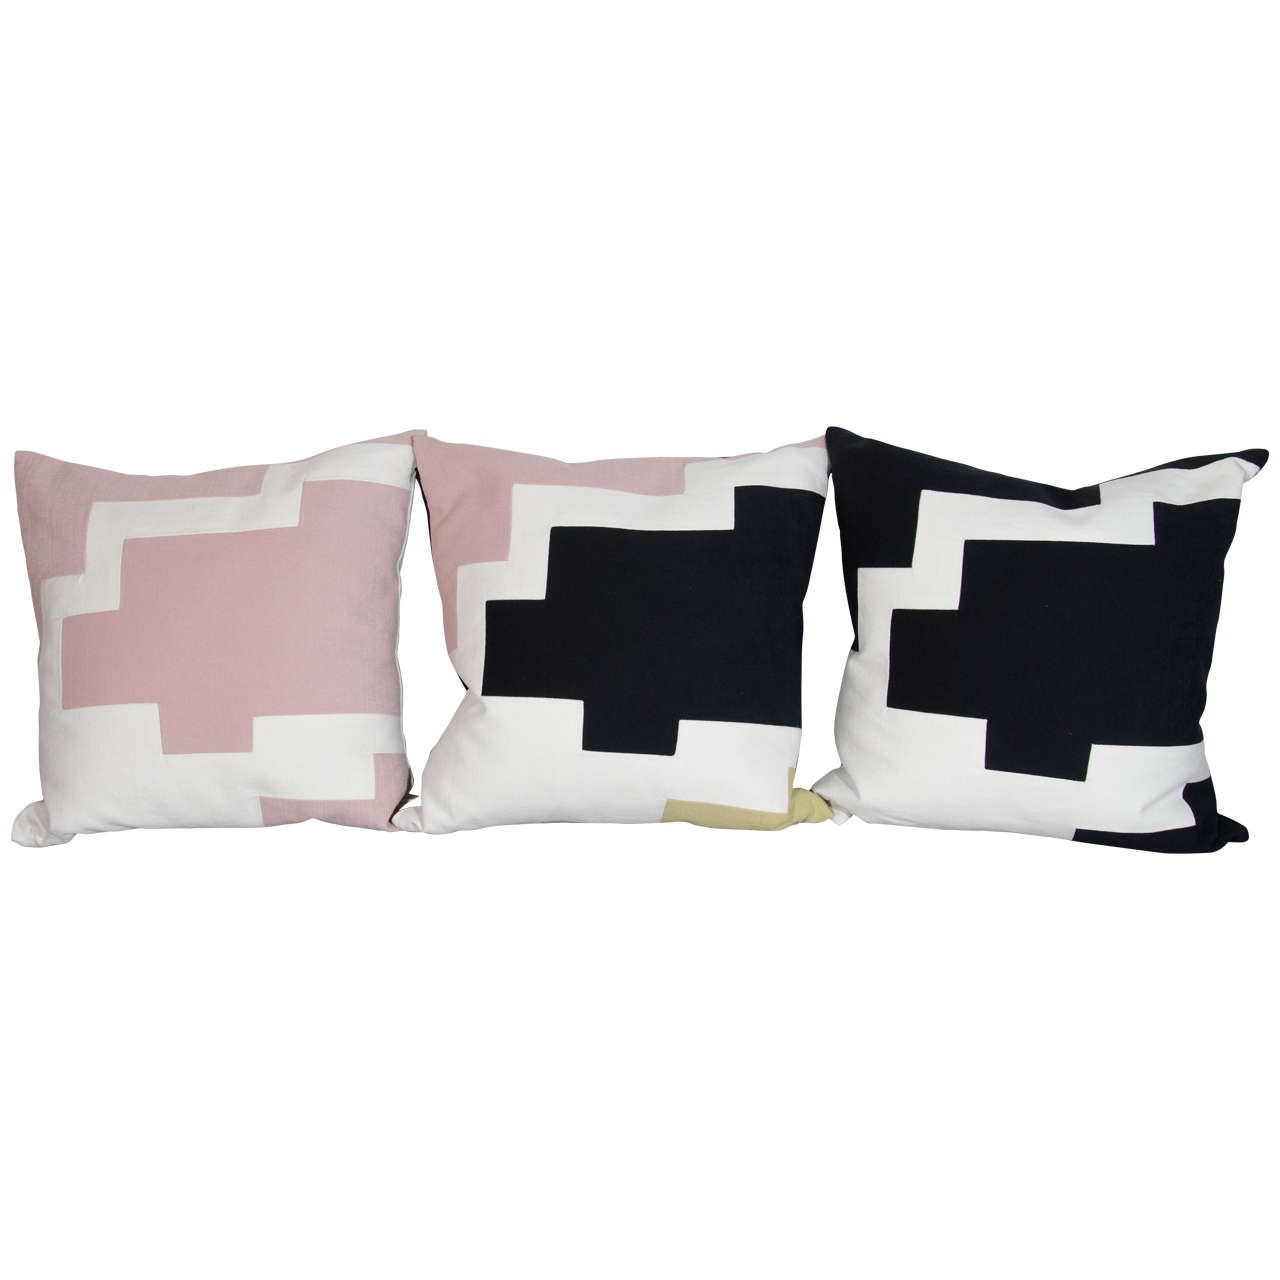 Couture throw pillows by Arguello Casa with abstract designs, inspired by the architectural skyline of New York City.  Individually handcrafted in New York, culminating in day long stitching process, and using the finest of Italian linens.  In hues